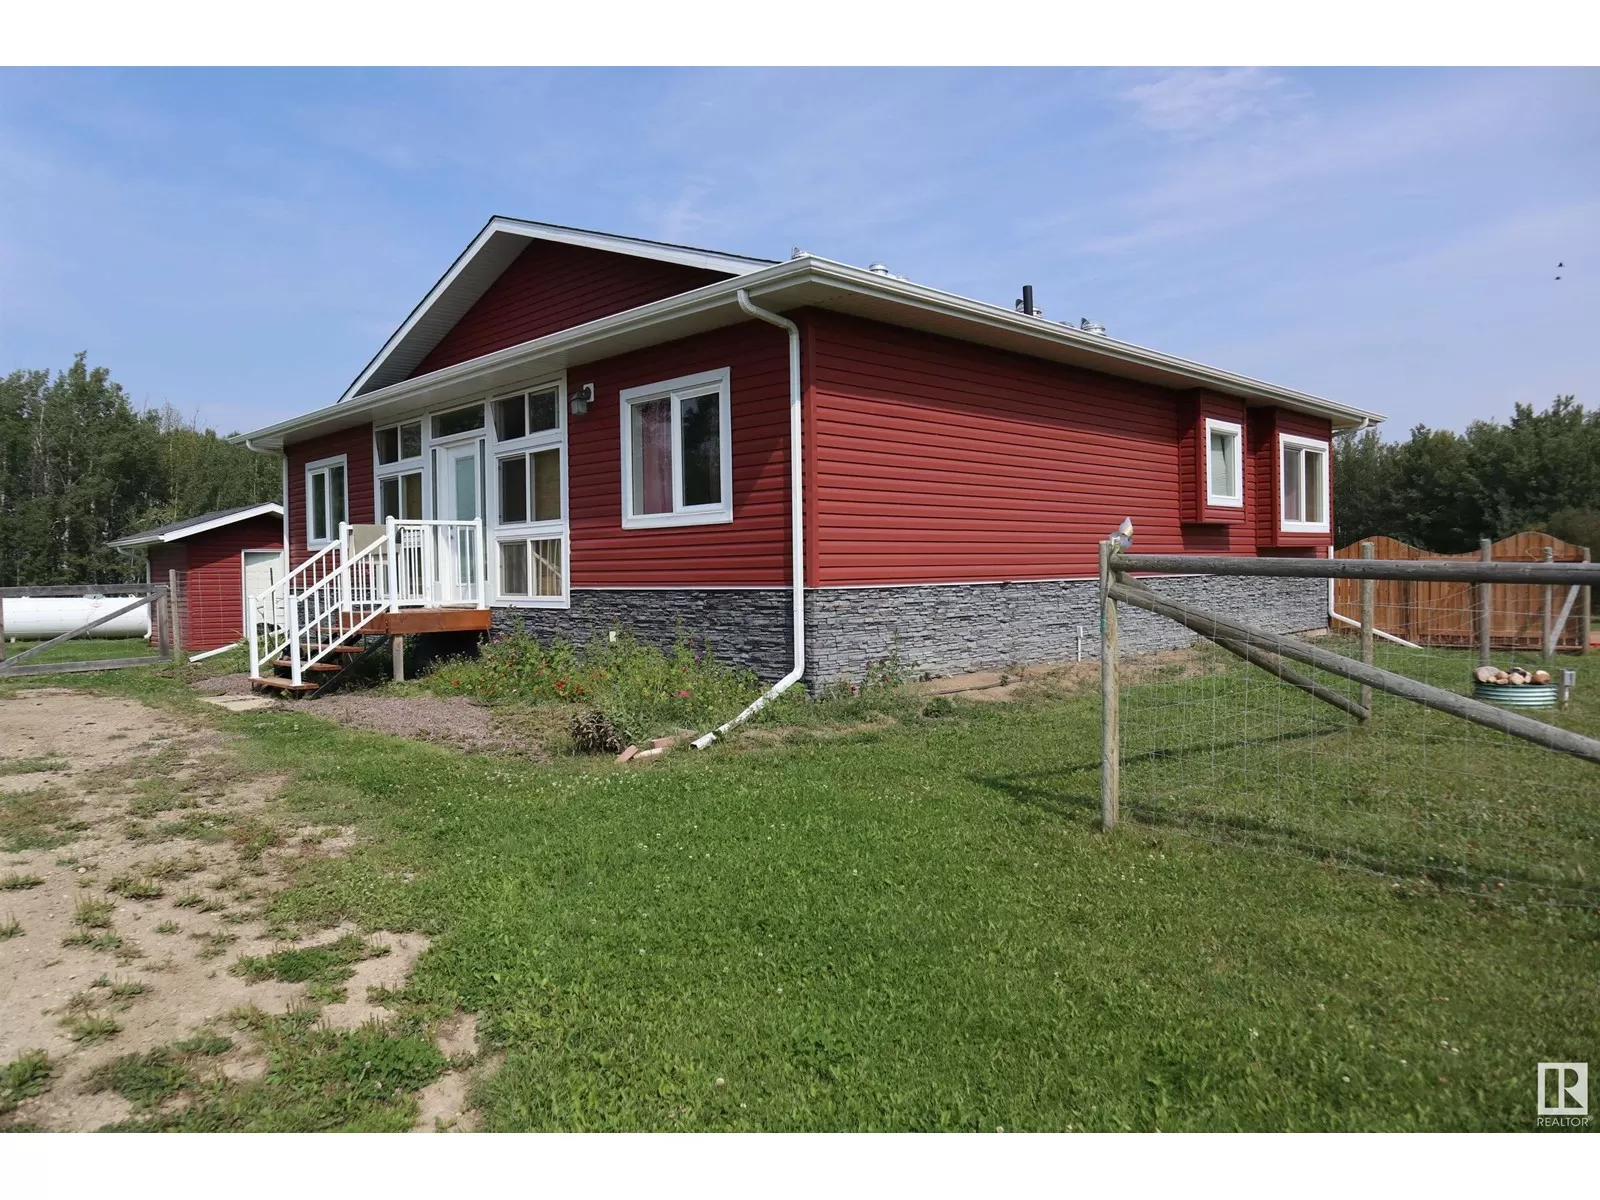 House for rent: 15070 Hwy 771, Rural Wetaskiwin County, Alberta T0C 2V0